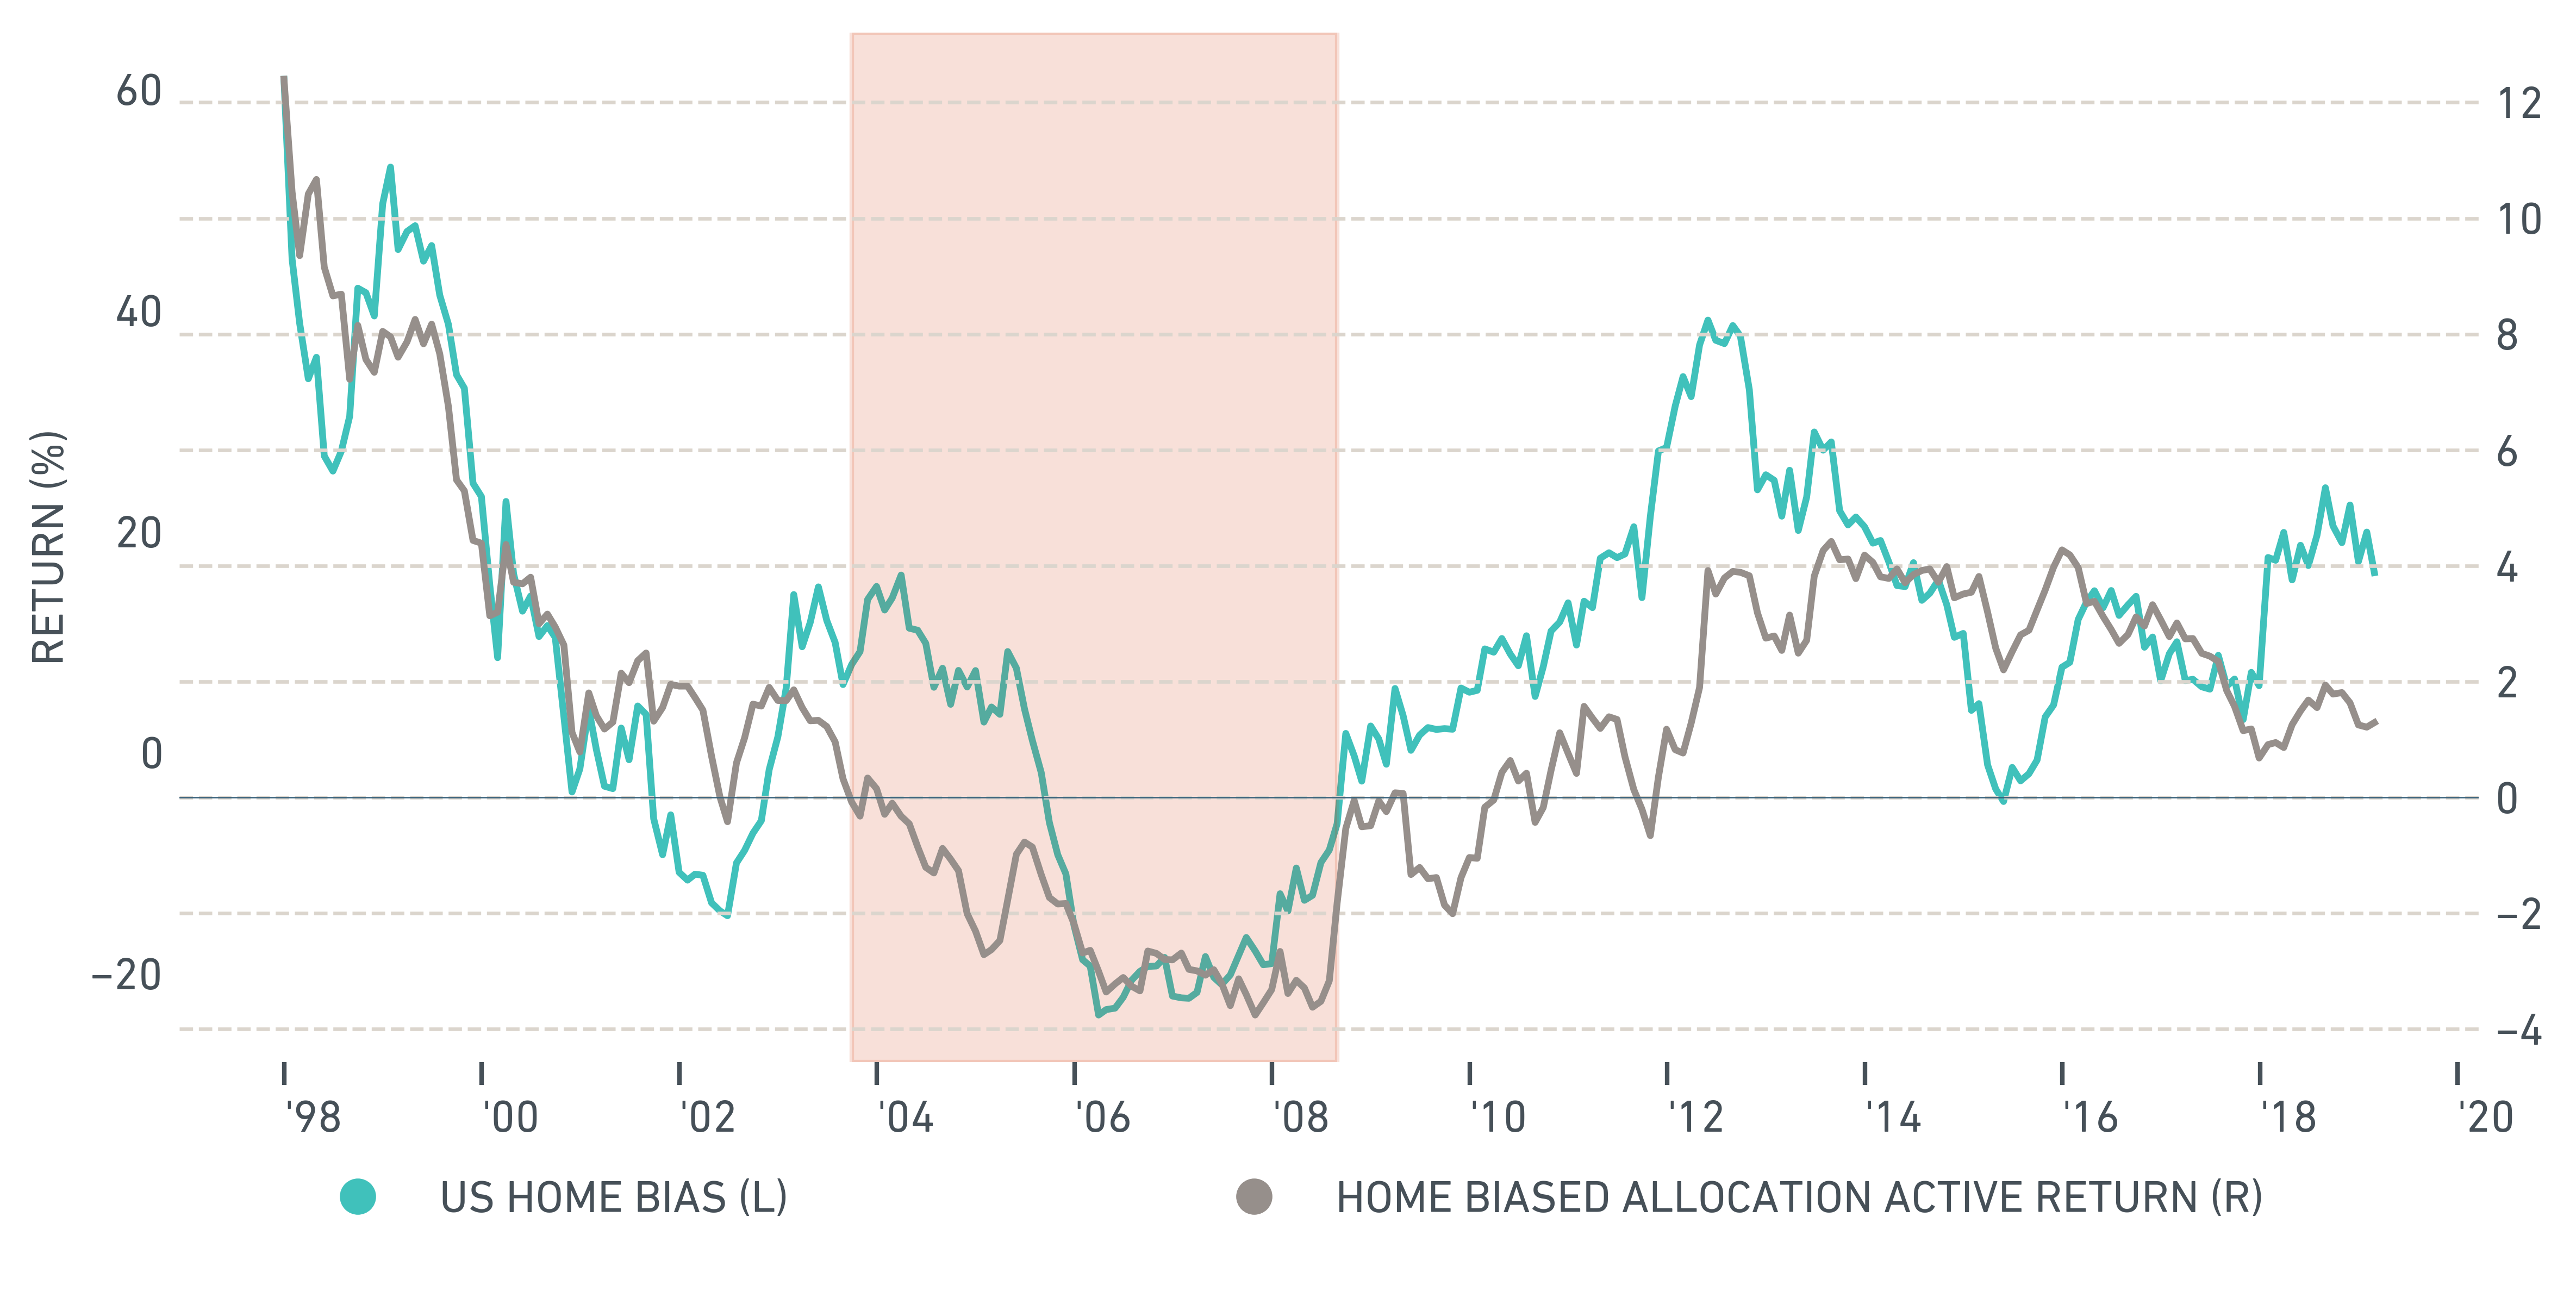 Rolling three-year return of U.S. home bias vs. reference allocation model